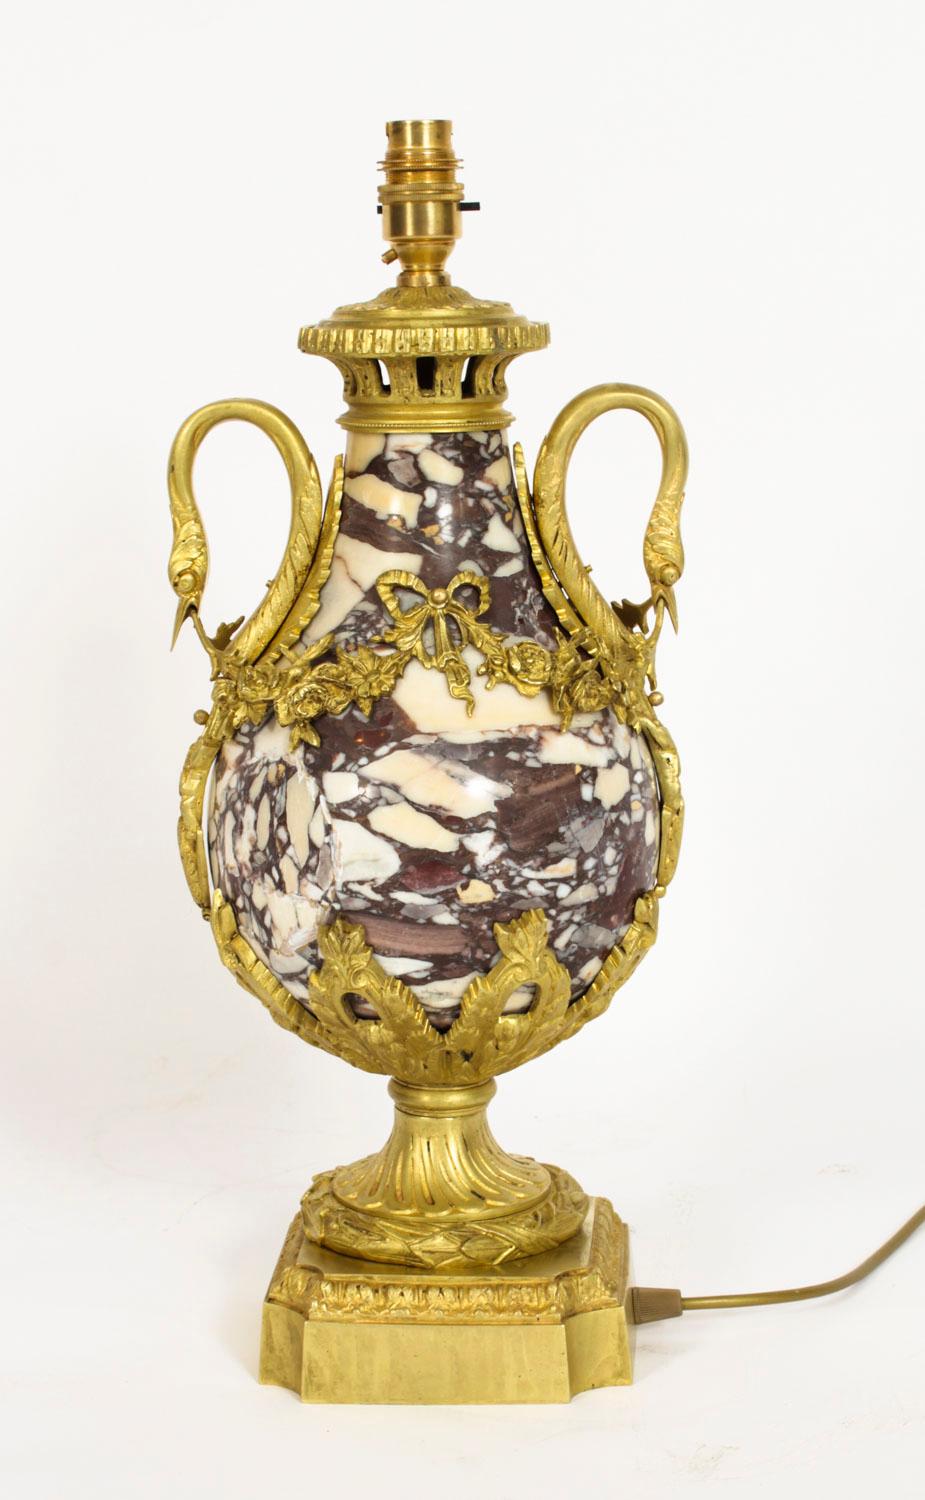 Antique French Louis XVI Revival Ormolu Mounted Marble Table Lamp 1860s For Sale 9